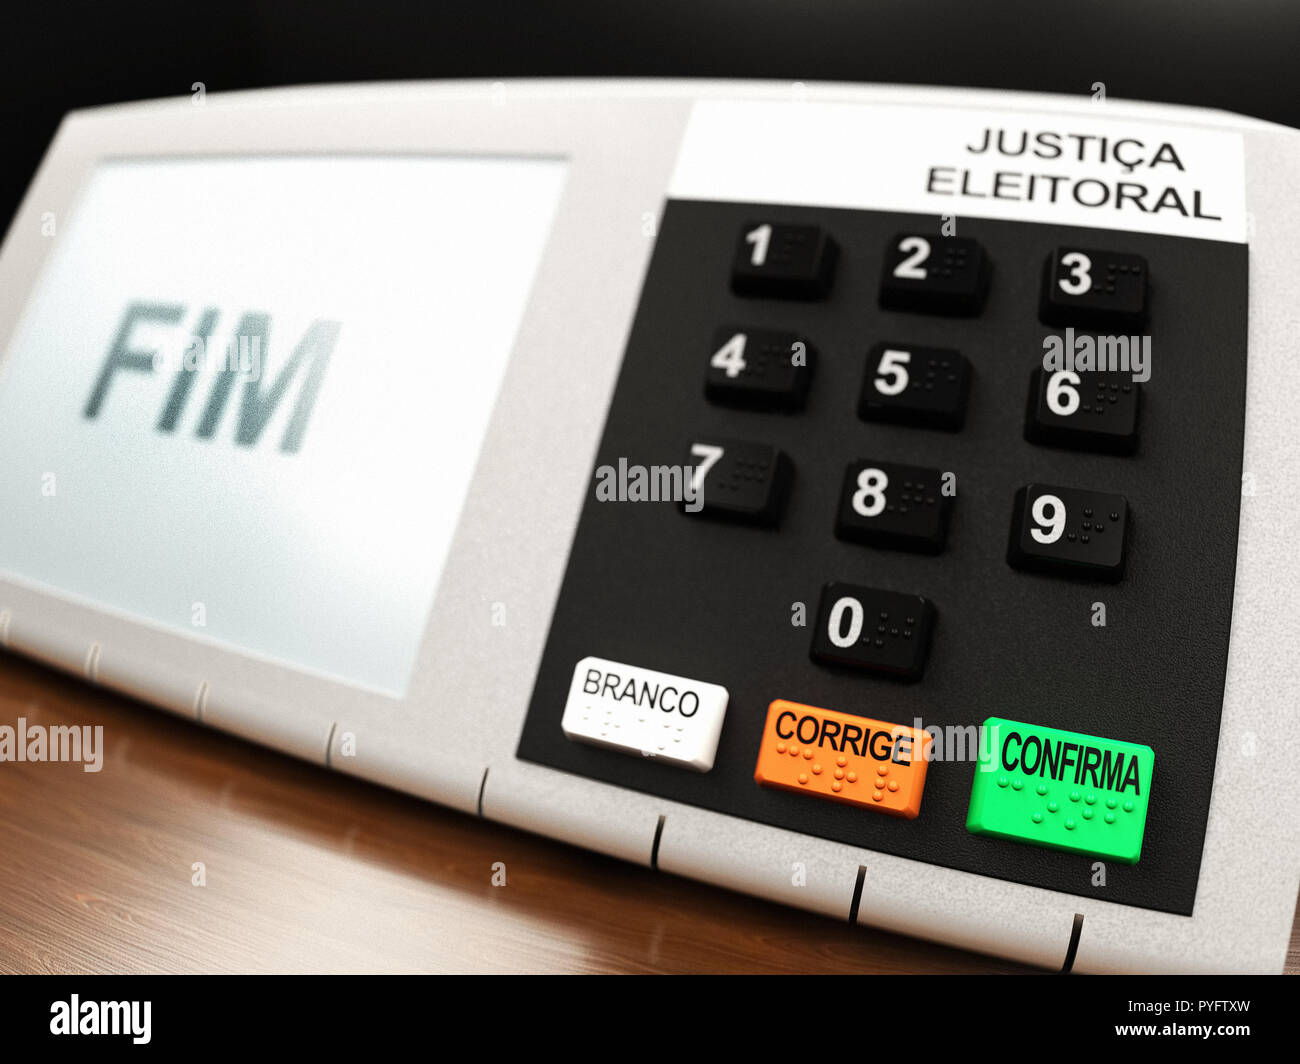 Brazilian voting machine (urna eletronica) from 2018 presidential elections in Brazil, with FIM (end) shown on the LCD display. Stock Photo